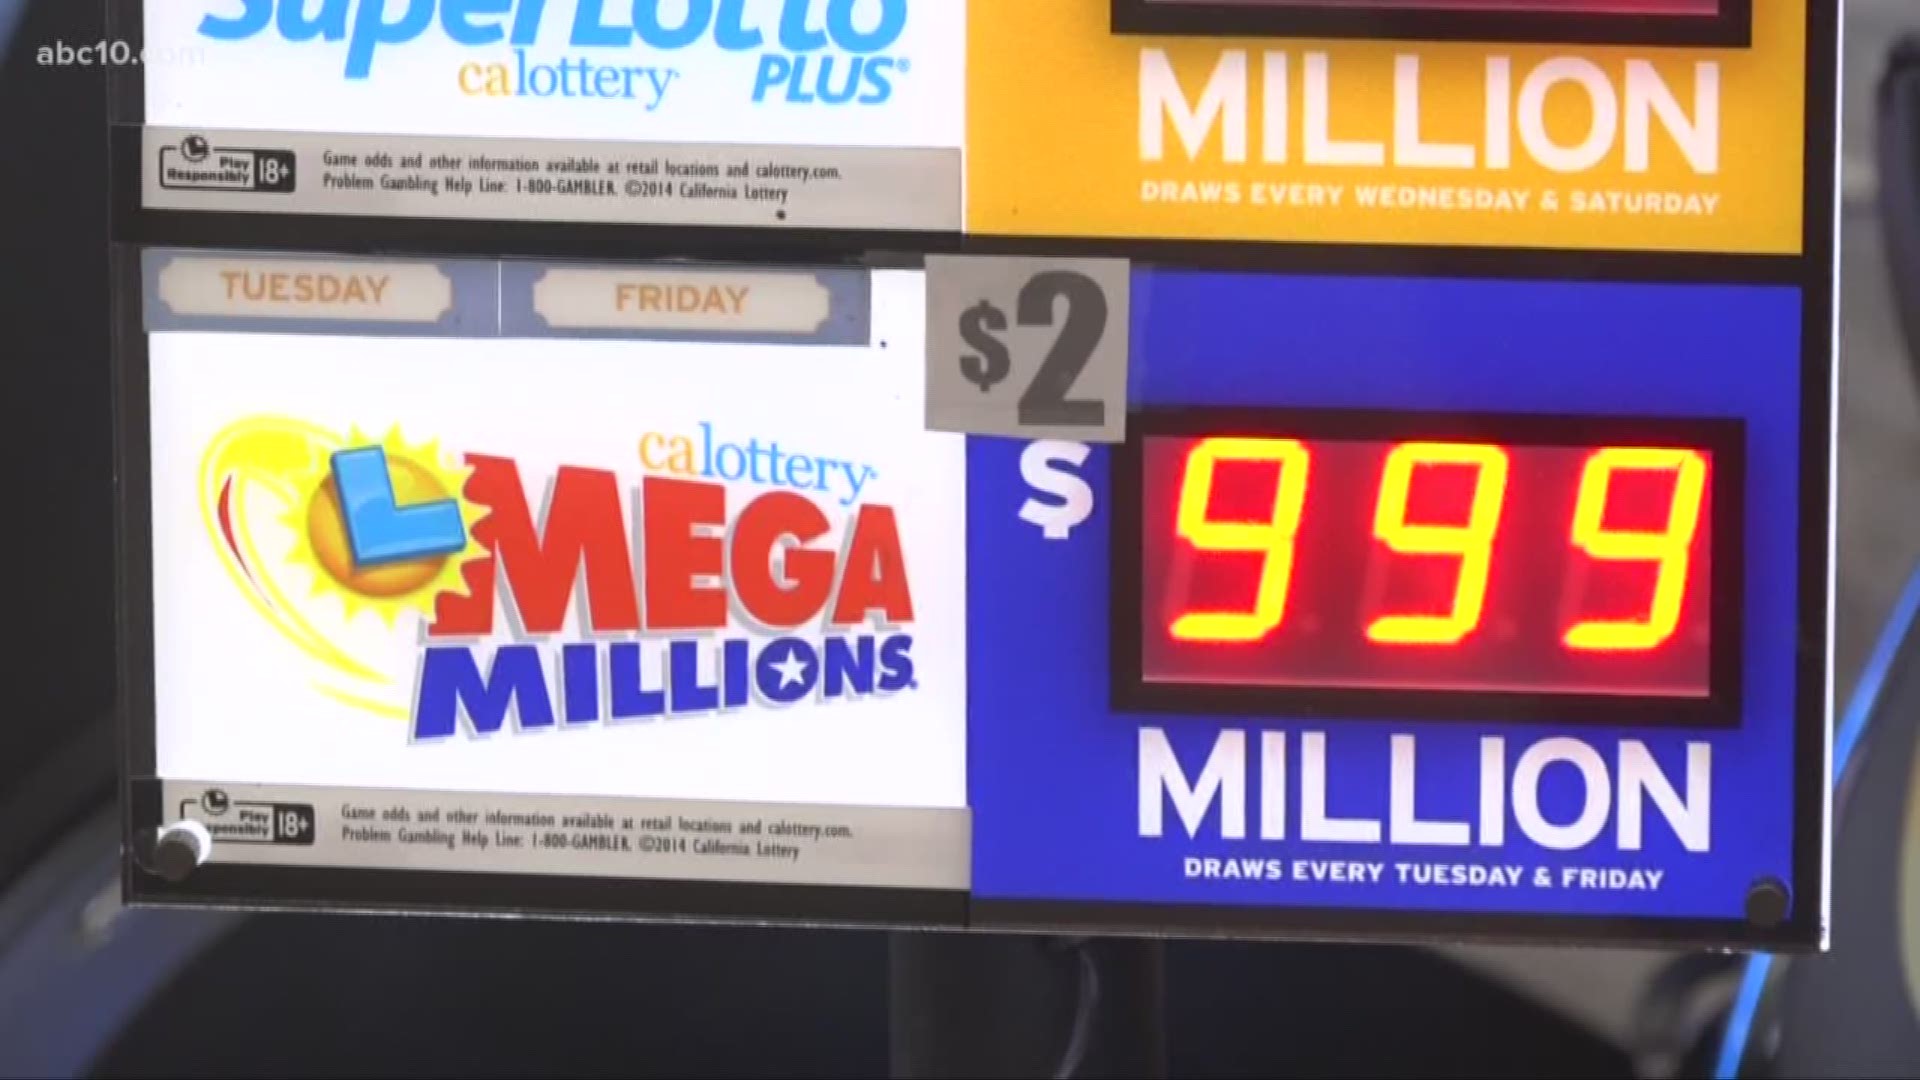 The Mega Millions jackpot has soared to an estimated $1 billion, with an estimated lump sum payment at $565 million. ABC 10 went ot one of Sacramento's "lucky stores" and asked folks what they would do with the money.